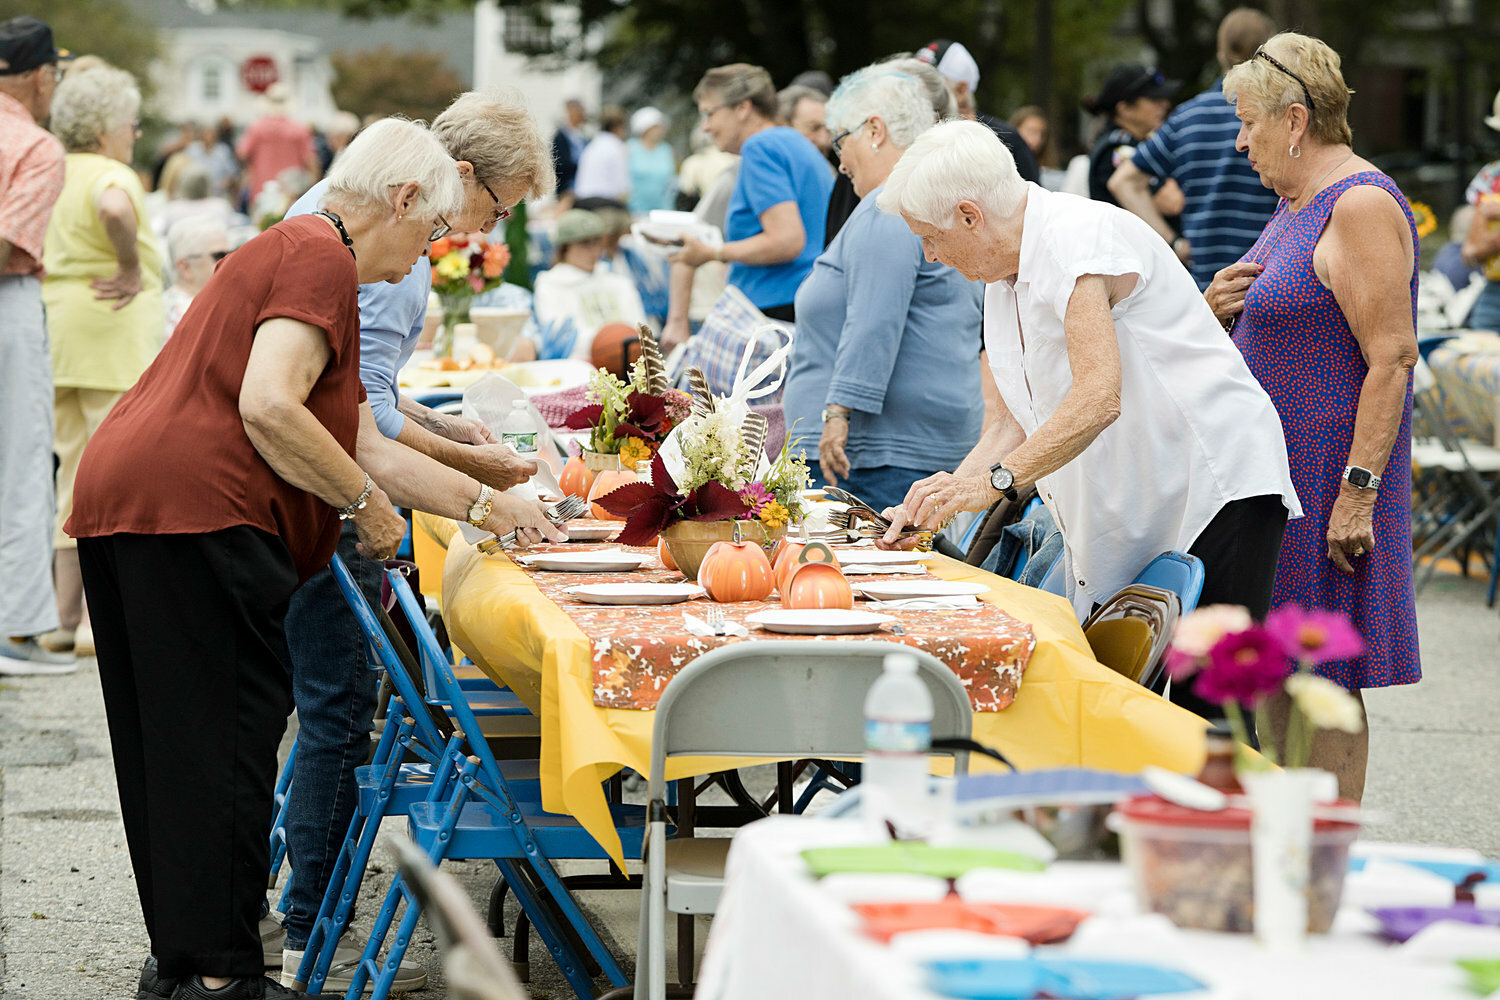 Diners are served during last year’s annual community dinner in Little Compton.